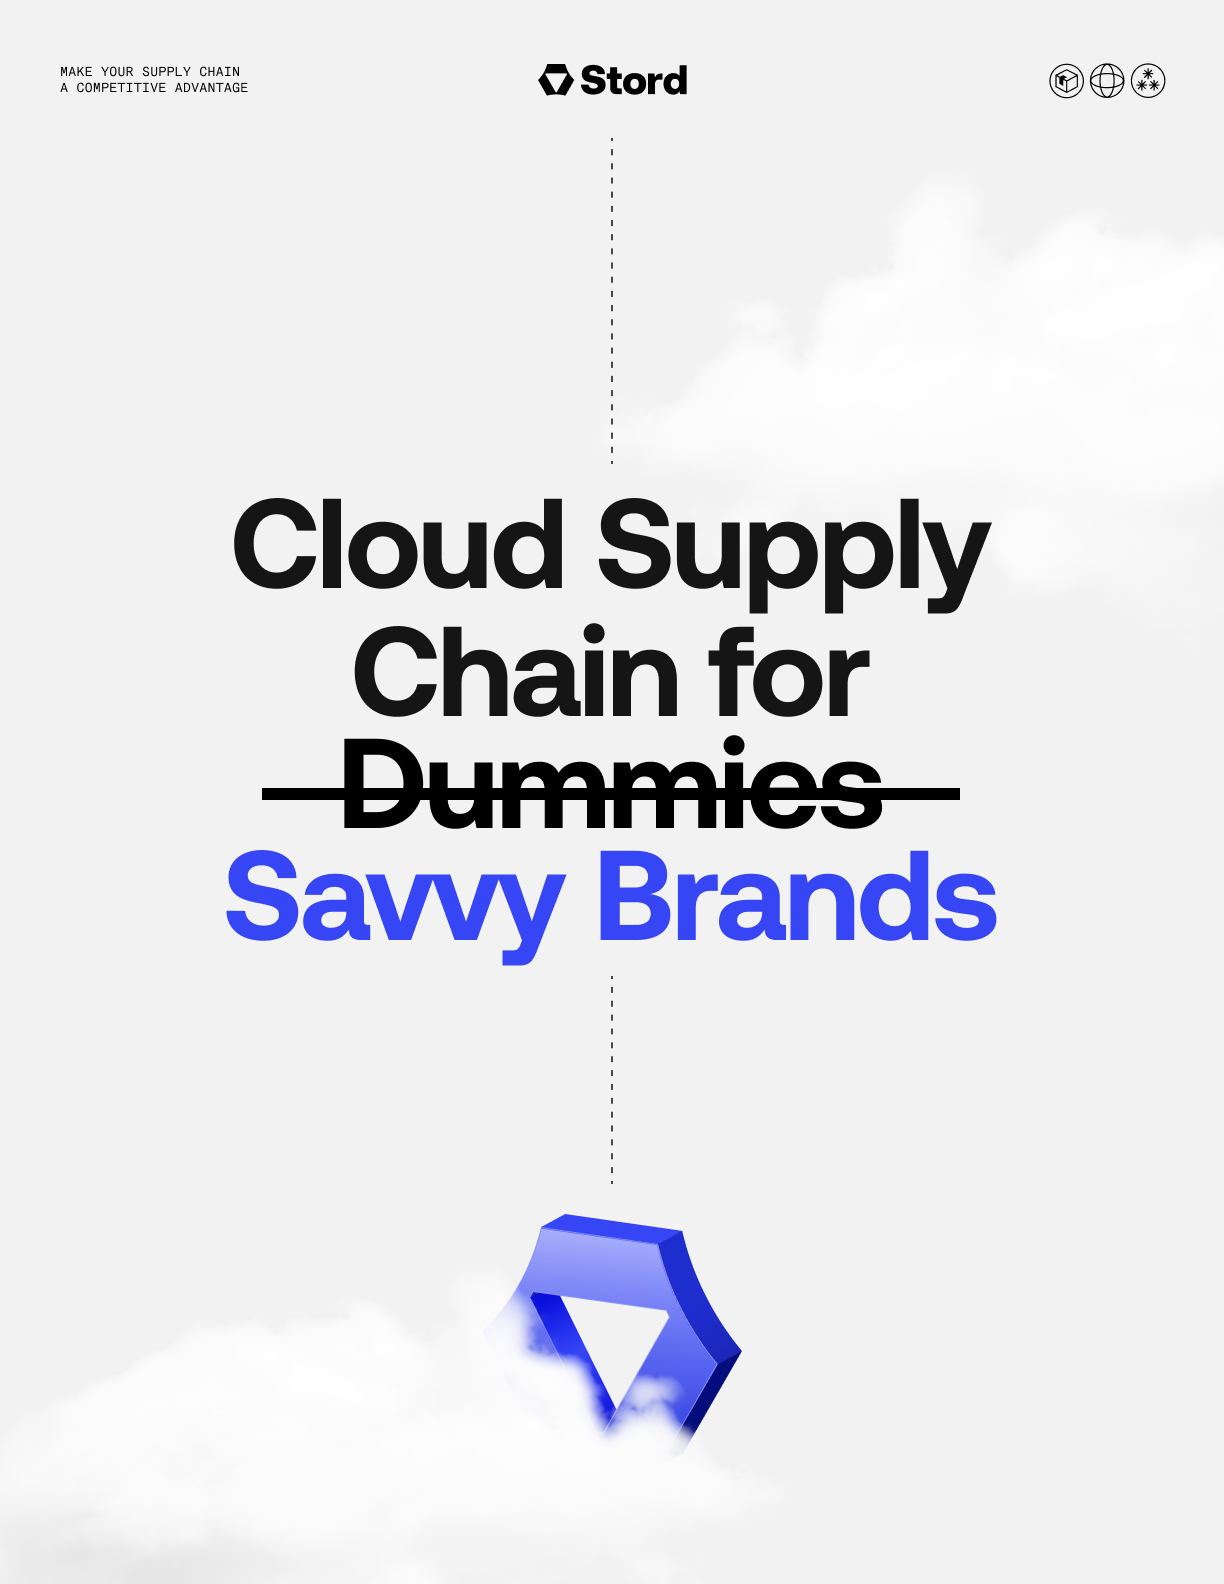 Cloud Supply Chain for Savvy Brands